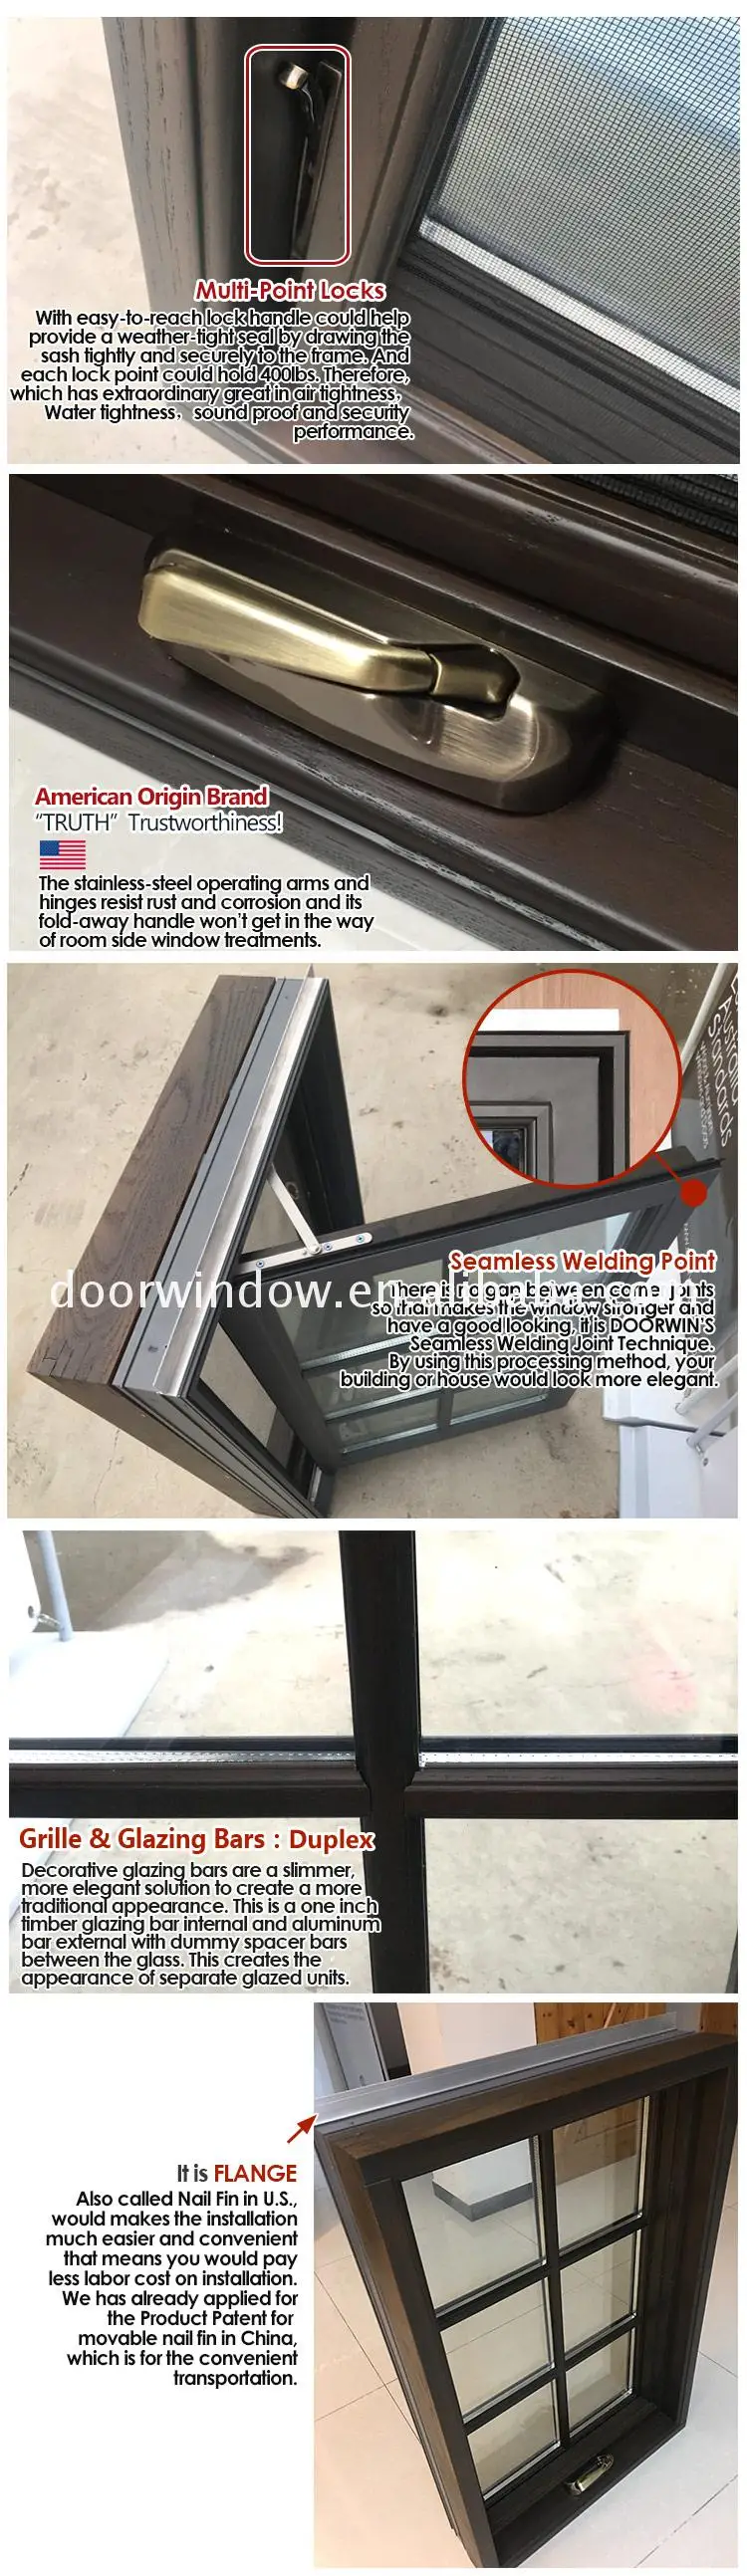 Solid wood casement window replacement windows old for sale